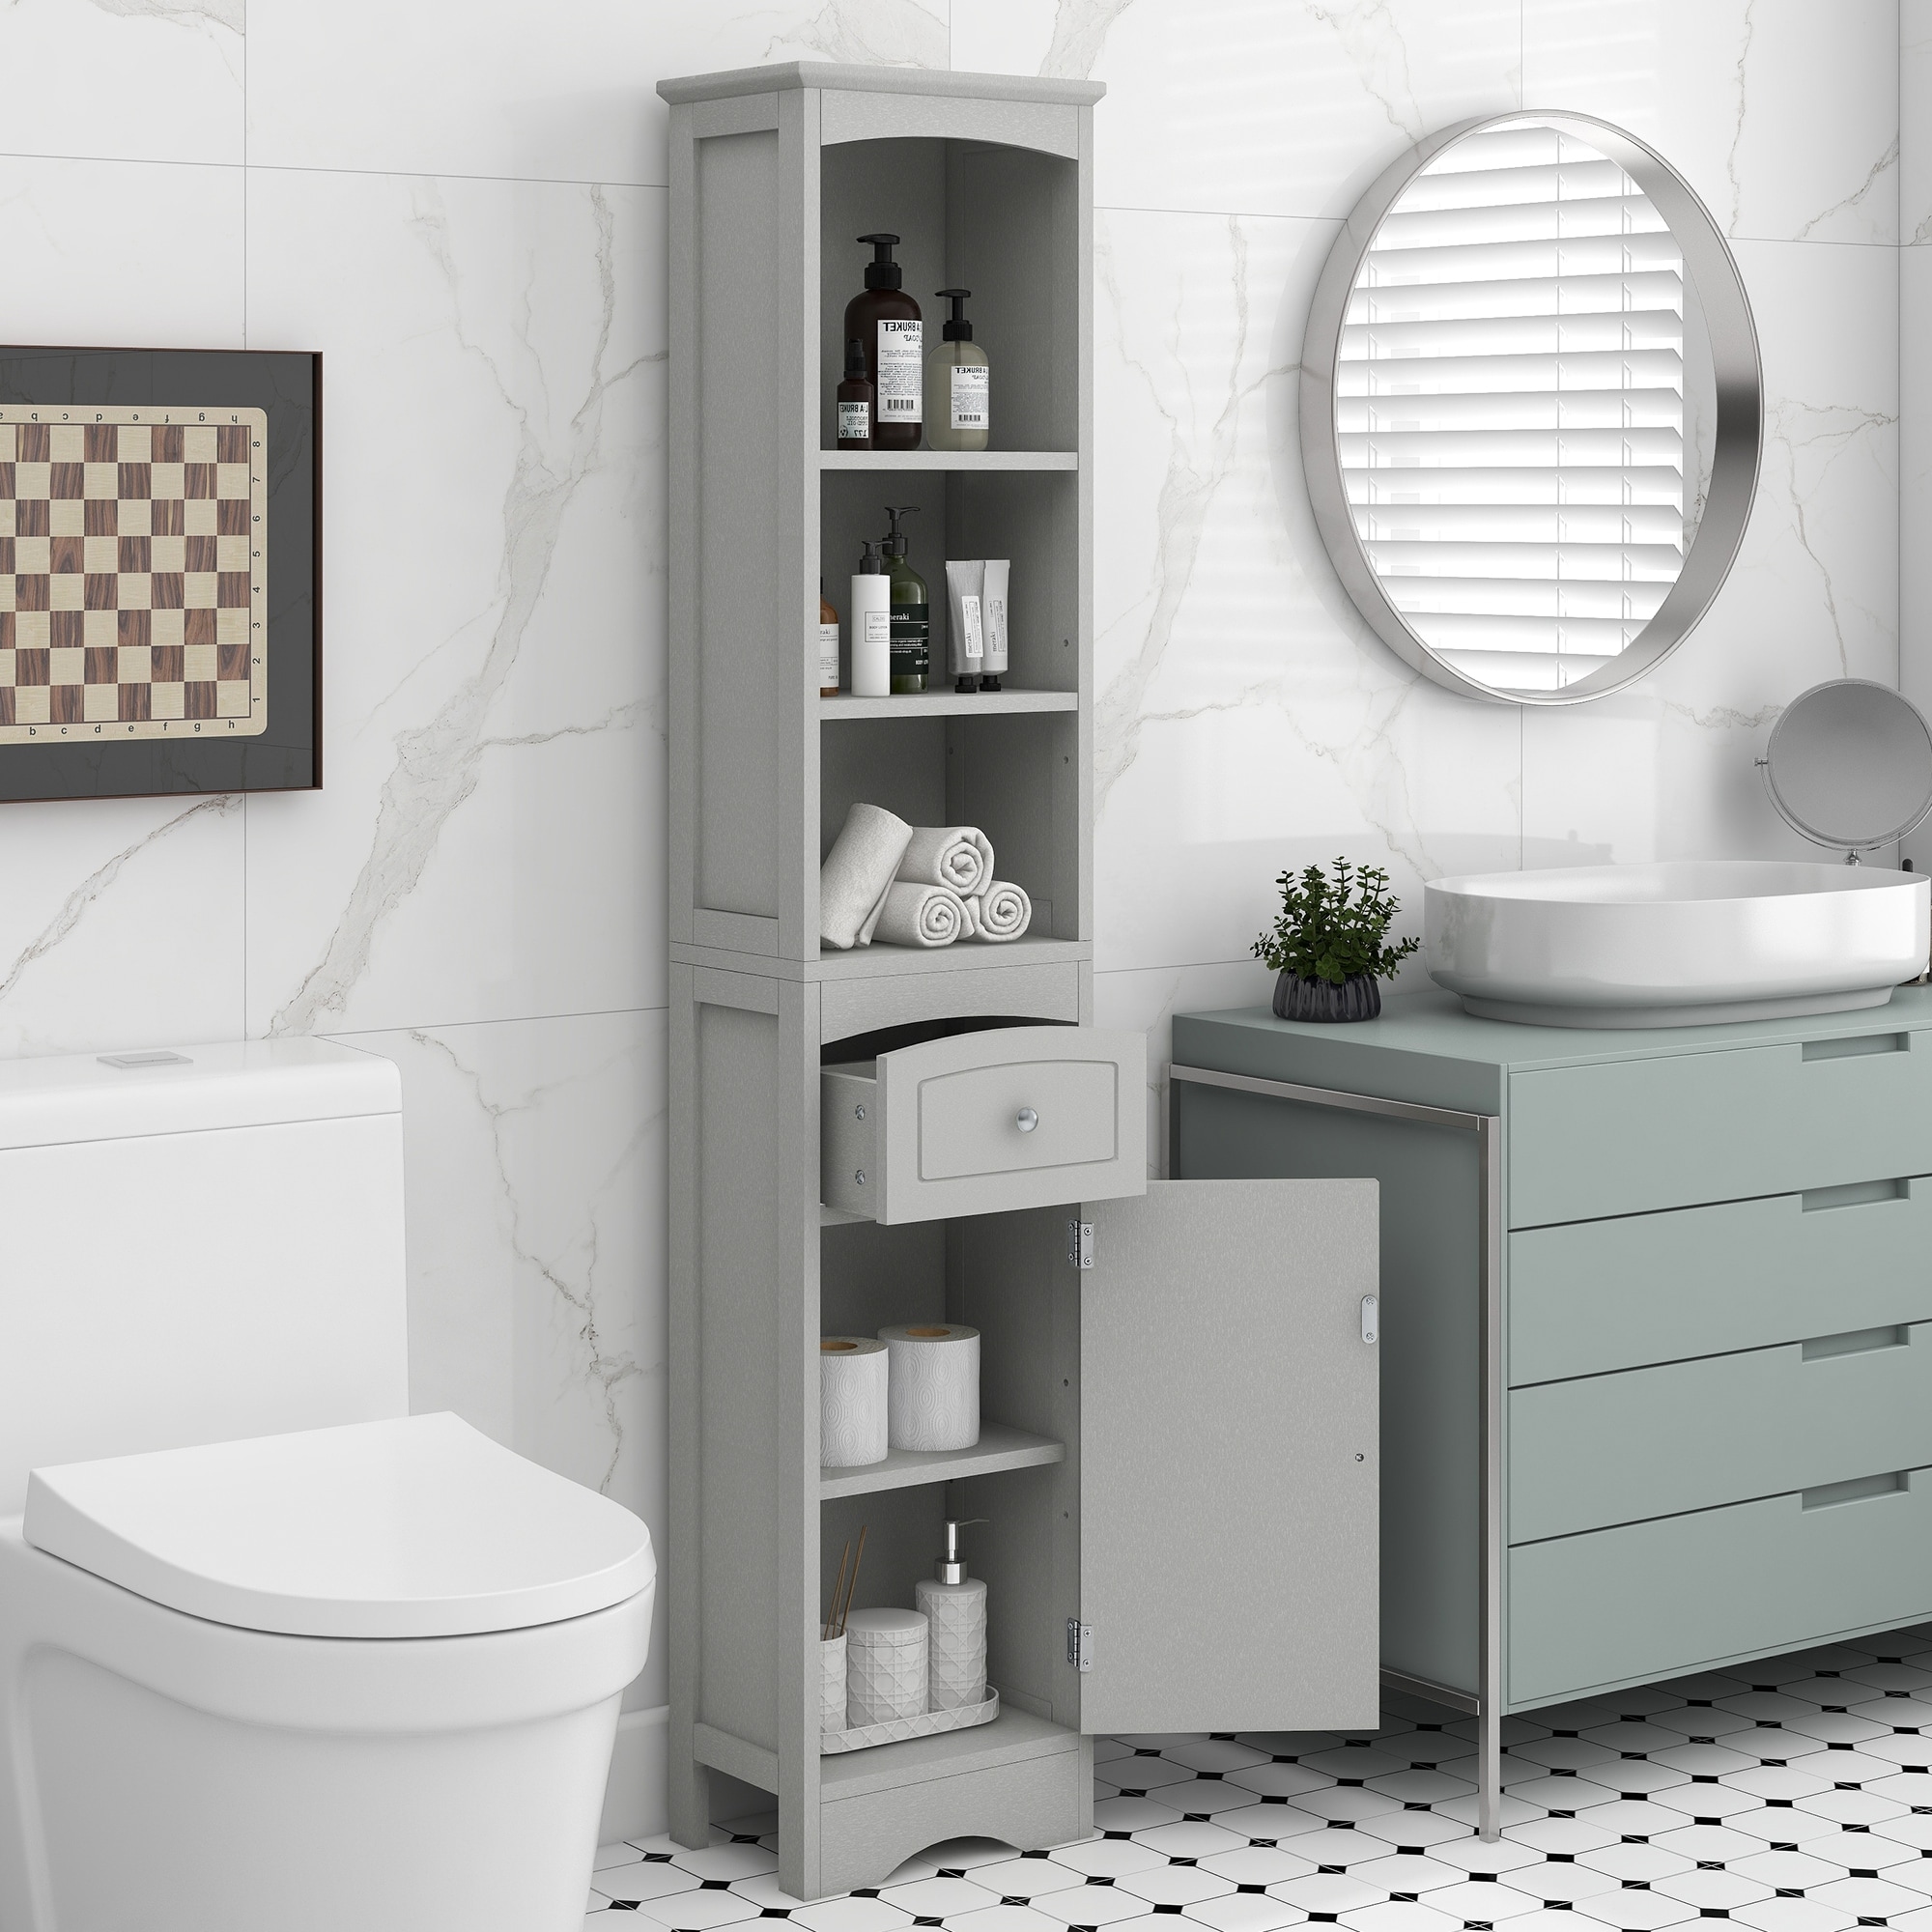 https://ak1.ostkcdn.com/images/products/is/images/direct/c2e1cf12e15f231e30ecb5a4edc8fb4b1922690b/Tall-Bathroom-Cabinet%2C-Freestanding-Storage-Cabinet-with-Drawer%2C-MDF-Board%2C-Adjustable-Shelf.jpg